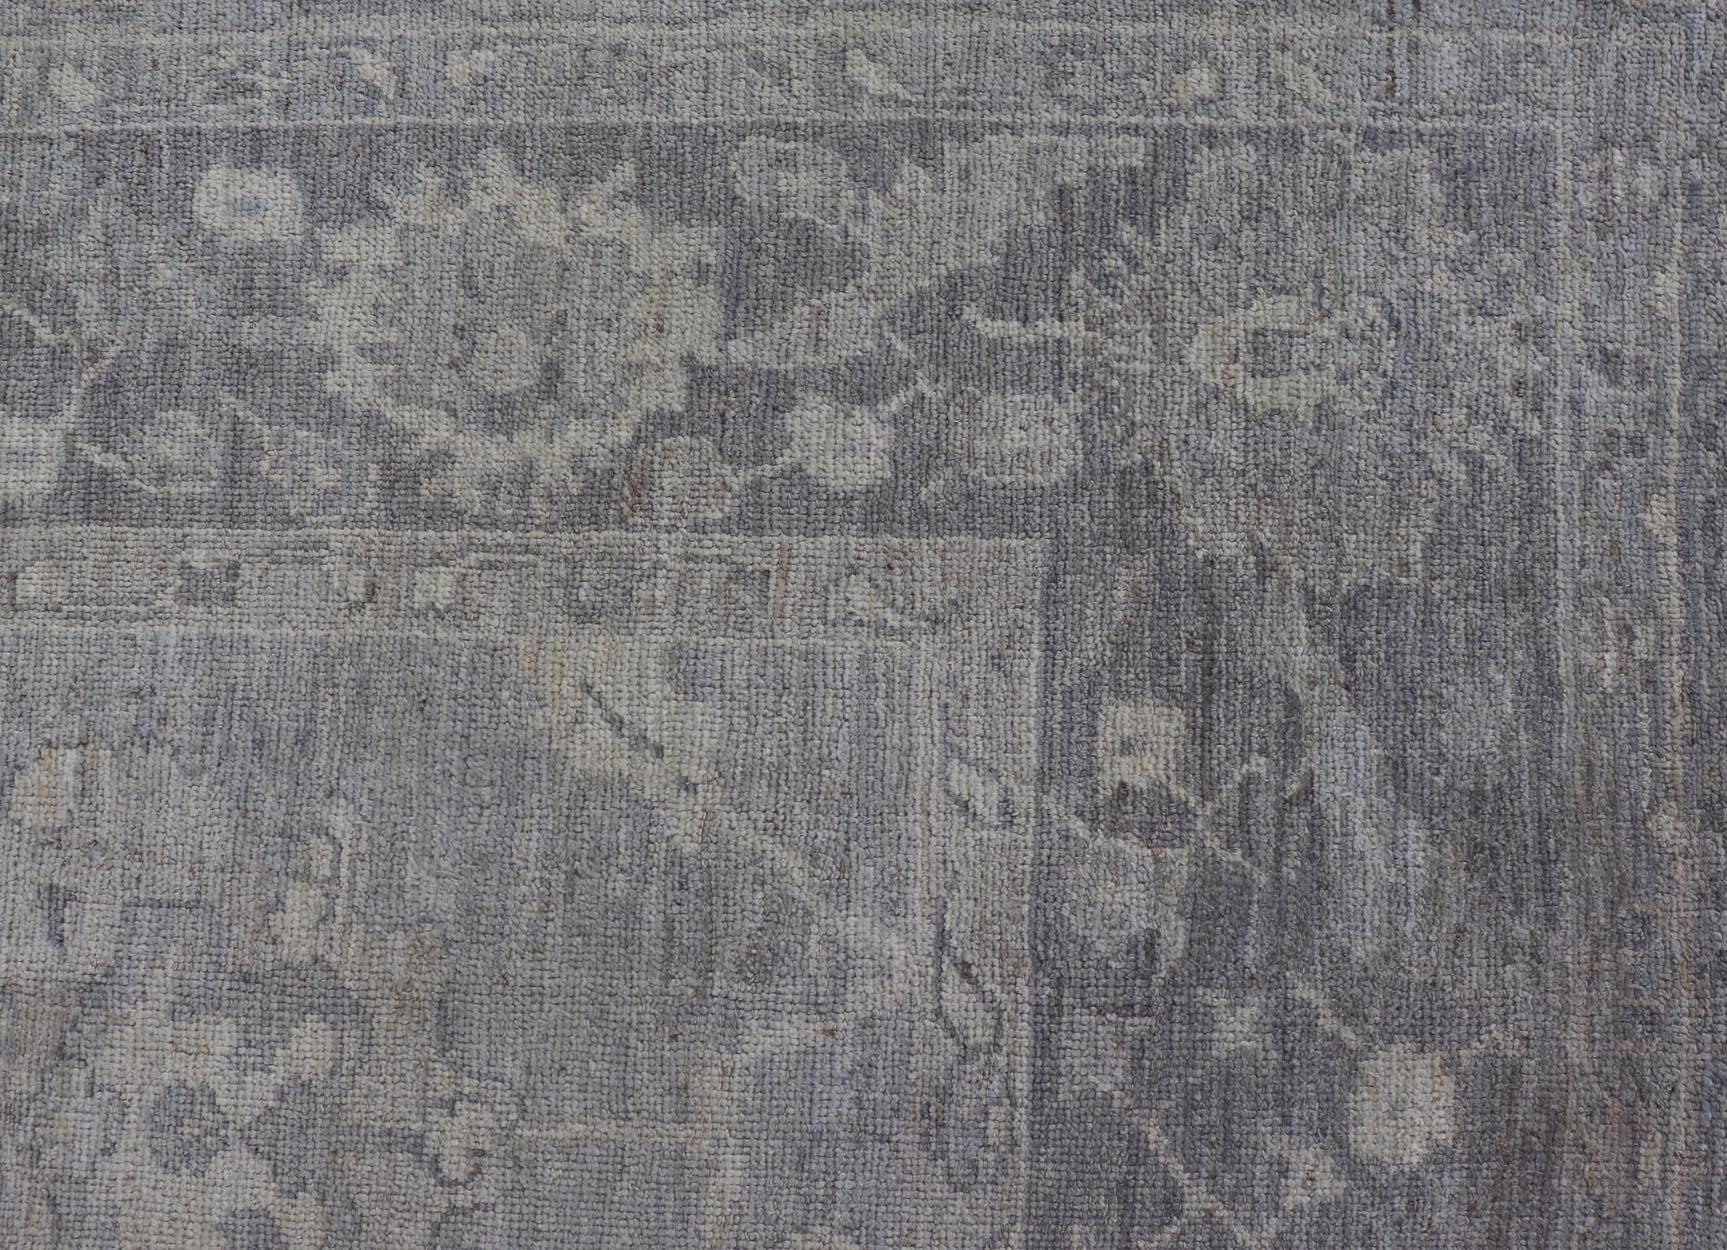 Large hand knotted Turkish oushak with floral motifs in grey, taupe & lavender.
Keivan Woven Arts/ rug /AN-146929 Early 21st century.

Made with a combination of angora and old wool, this magnificent vintage Turkish Oushak boasts an all-over